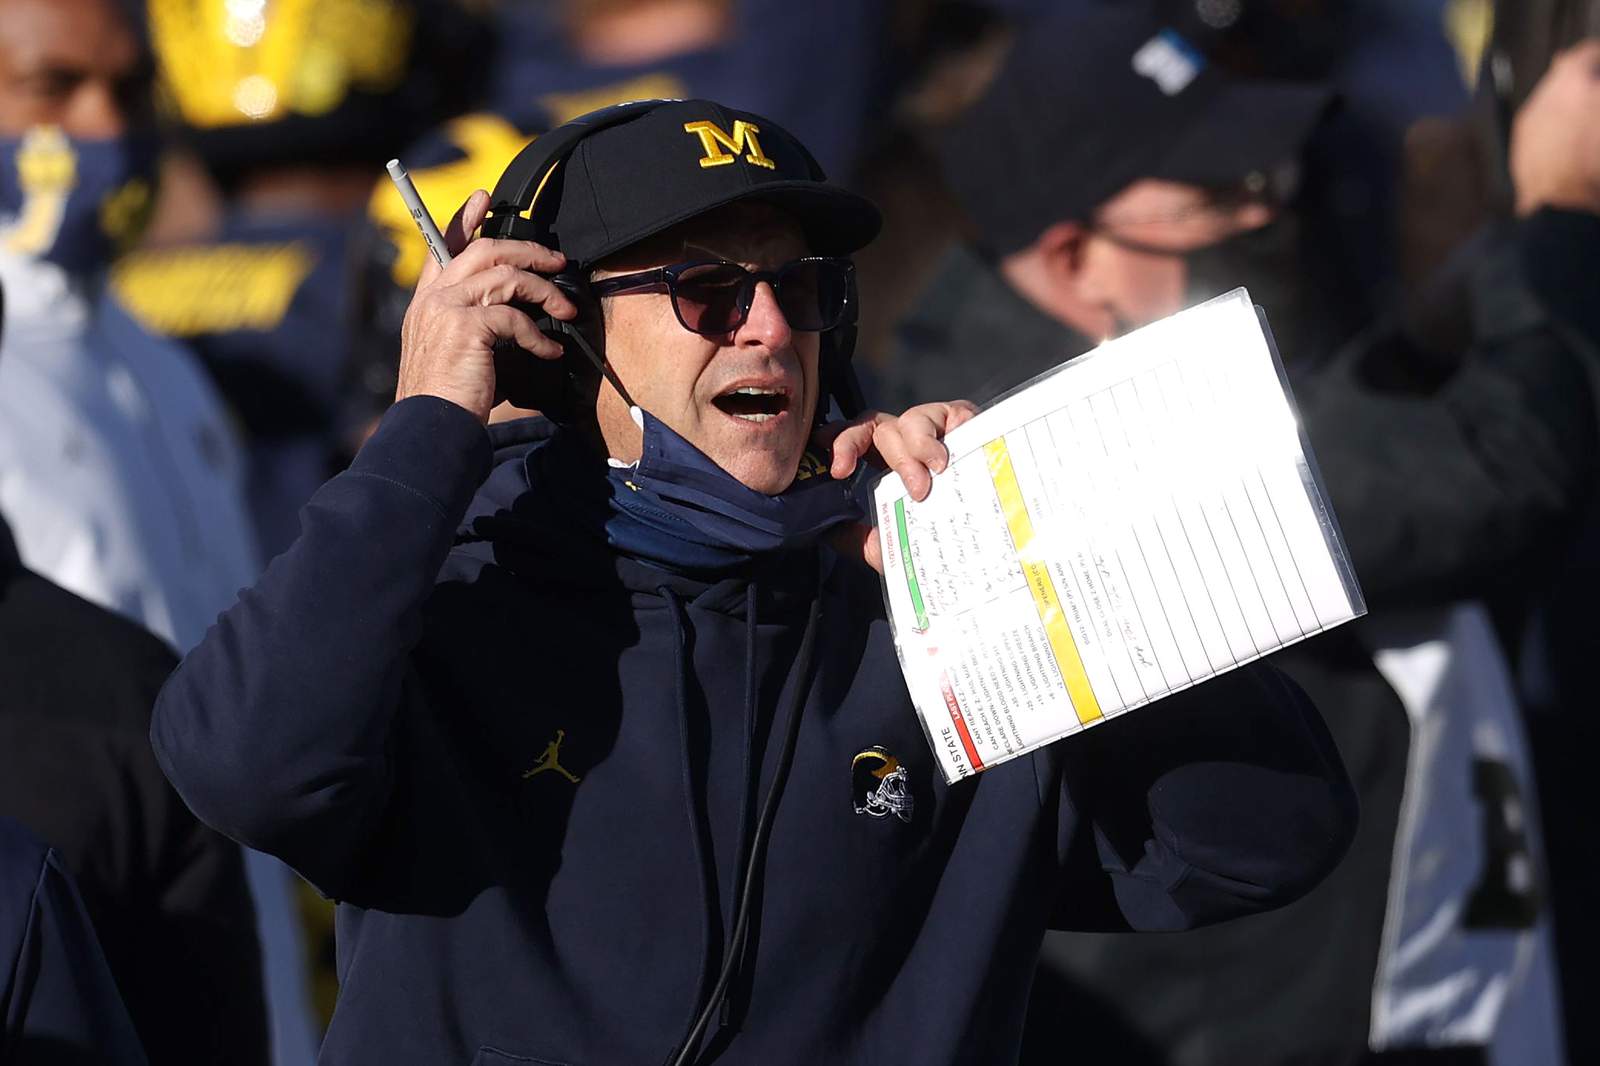 Michigan cancels rivalry football game vs. Ohio State due to rising COVID-19 cases